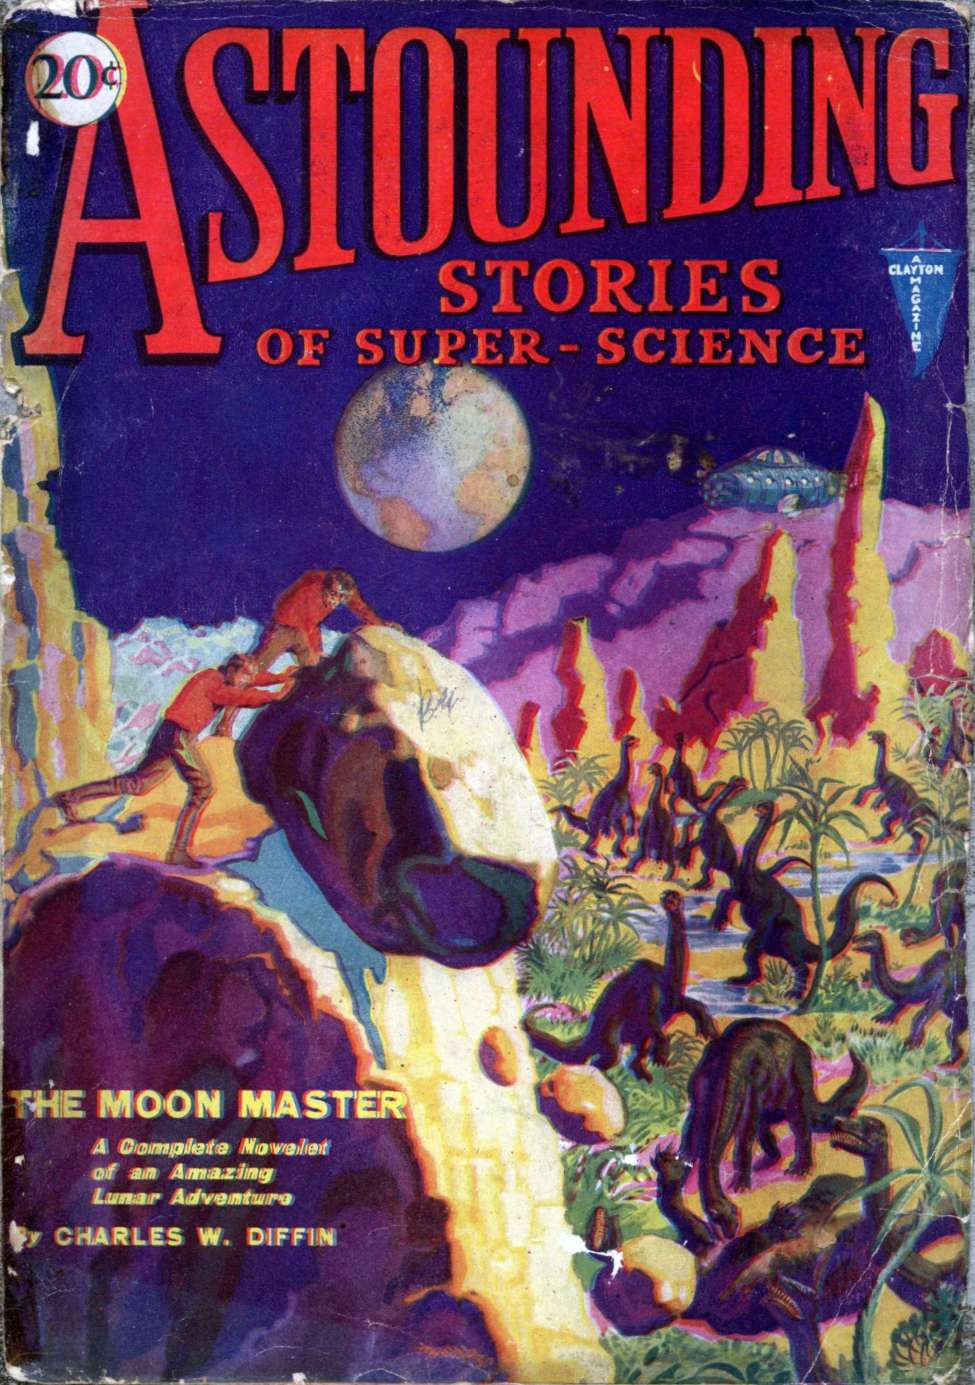 Comic Book Cover For Astounding v2 3 - The Moon Master - Charles W. Diffin